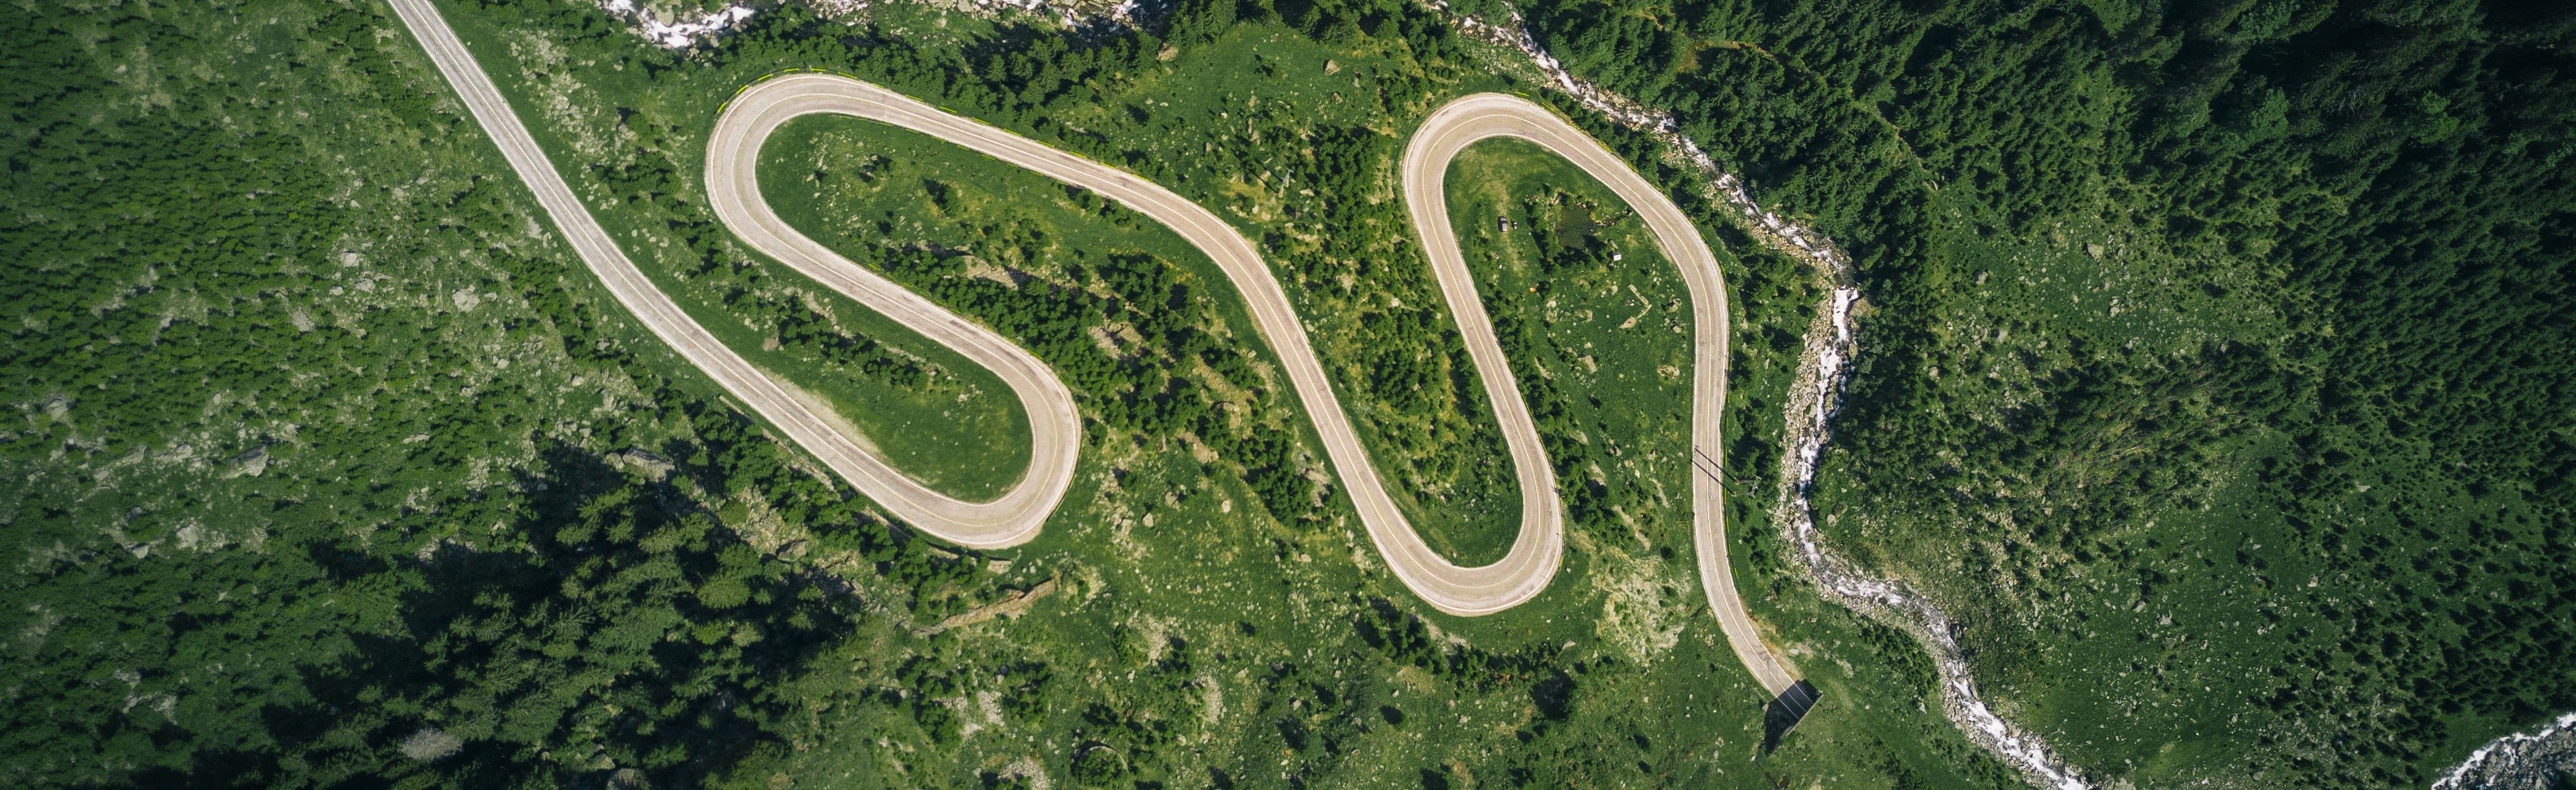 aerial view of a long, winding road in a green valley